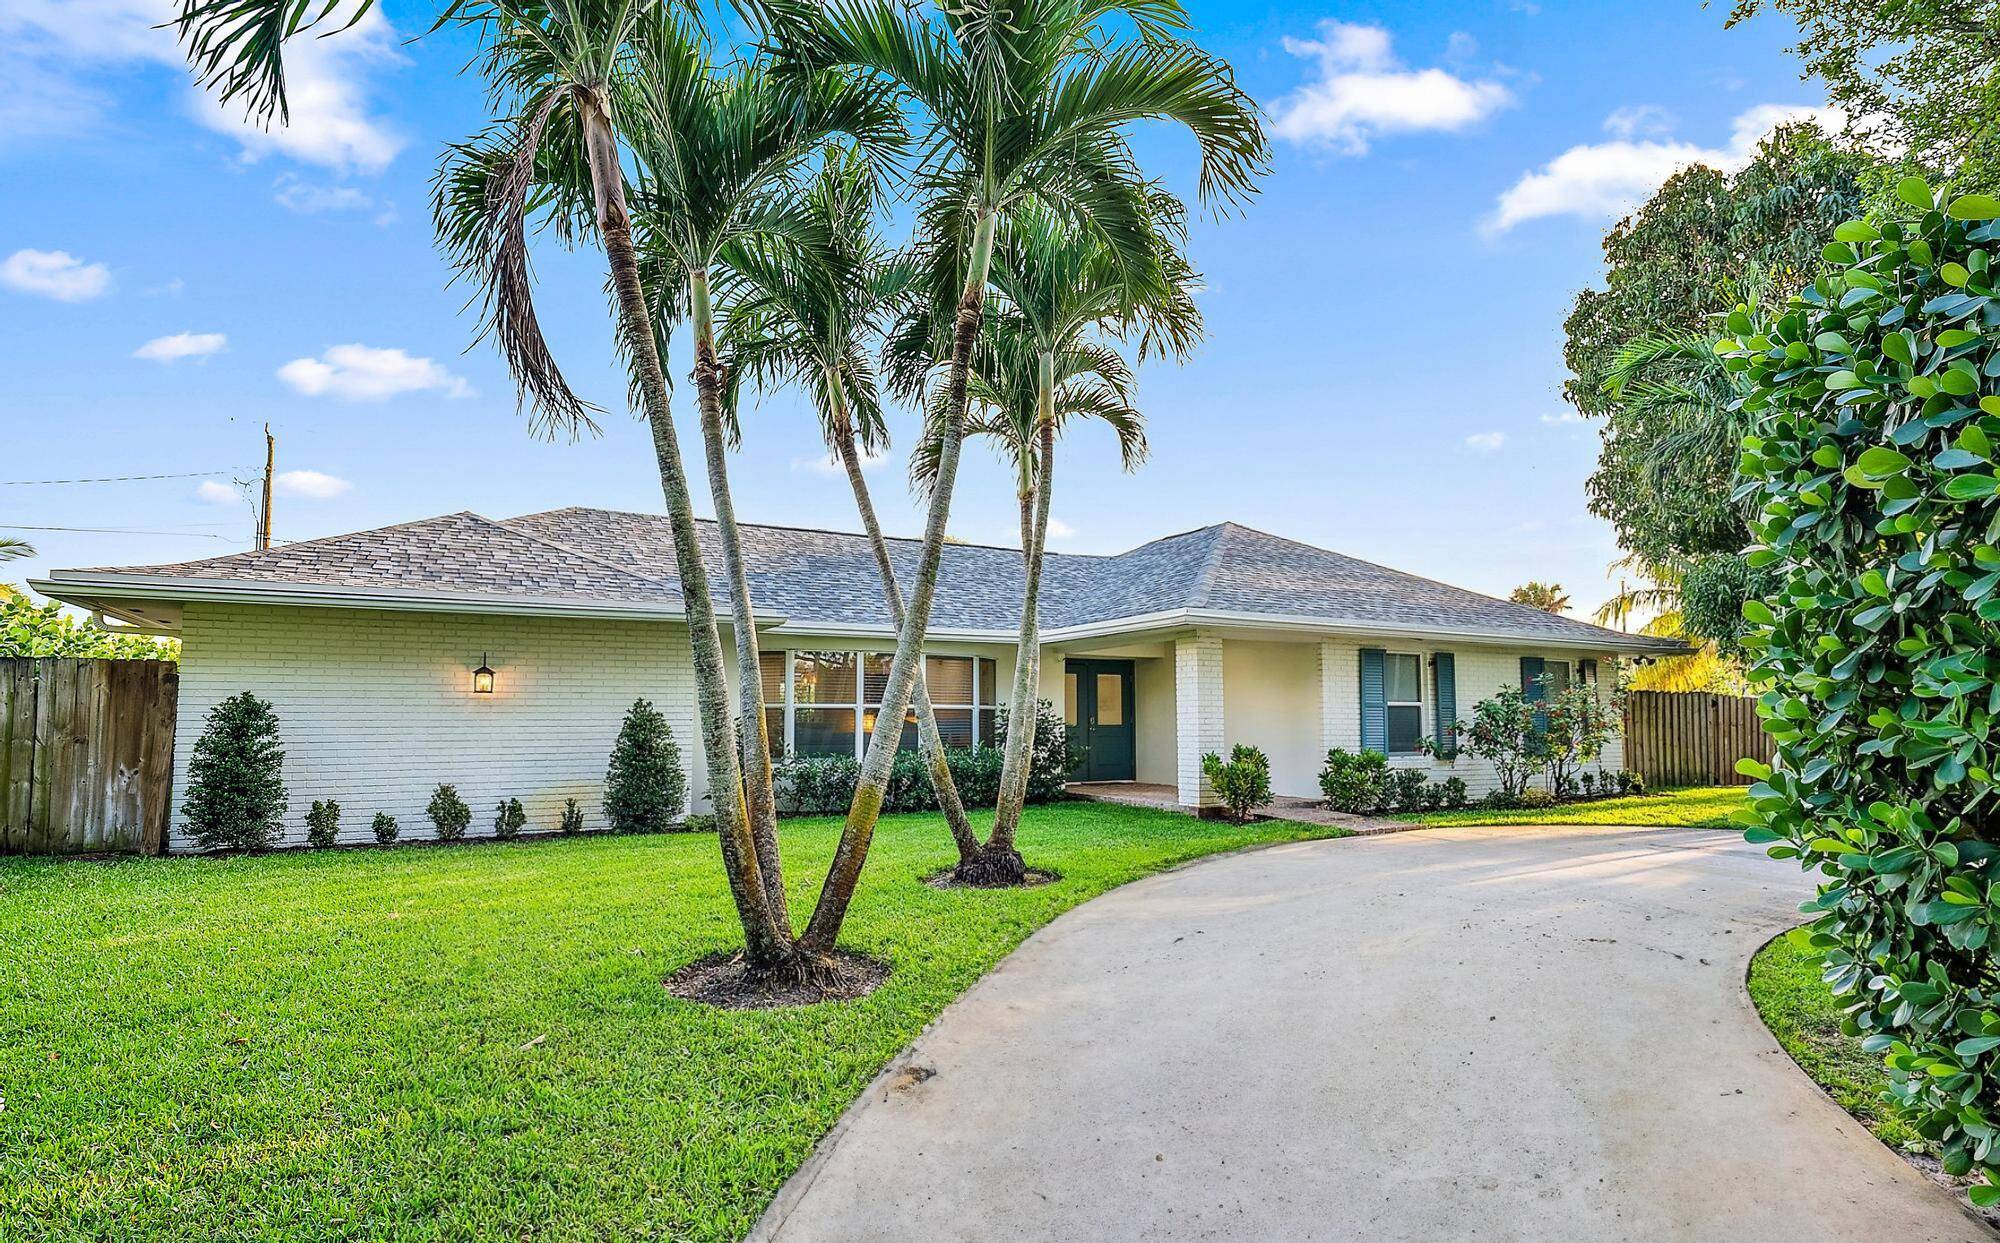 Discover your IDEAL annual rental in the heart of Tequesta !